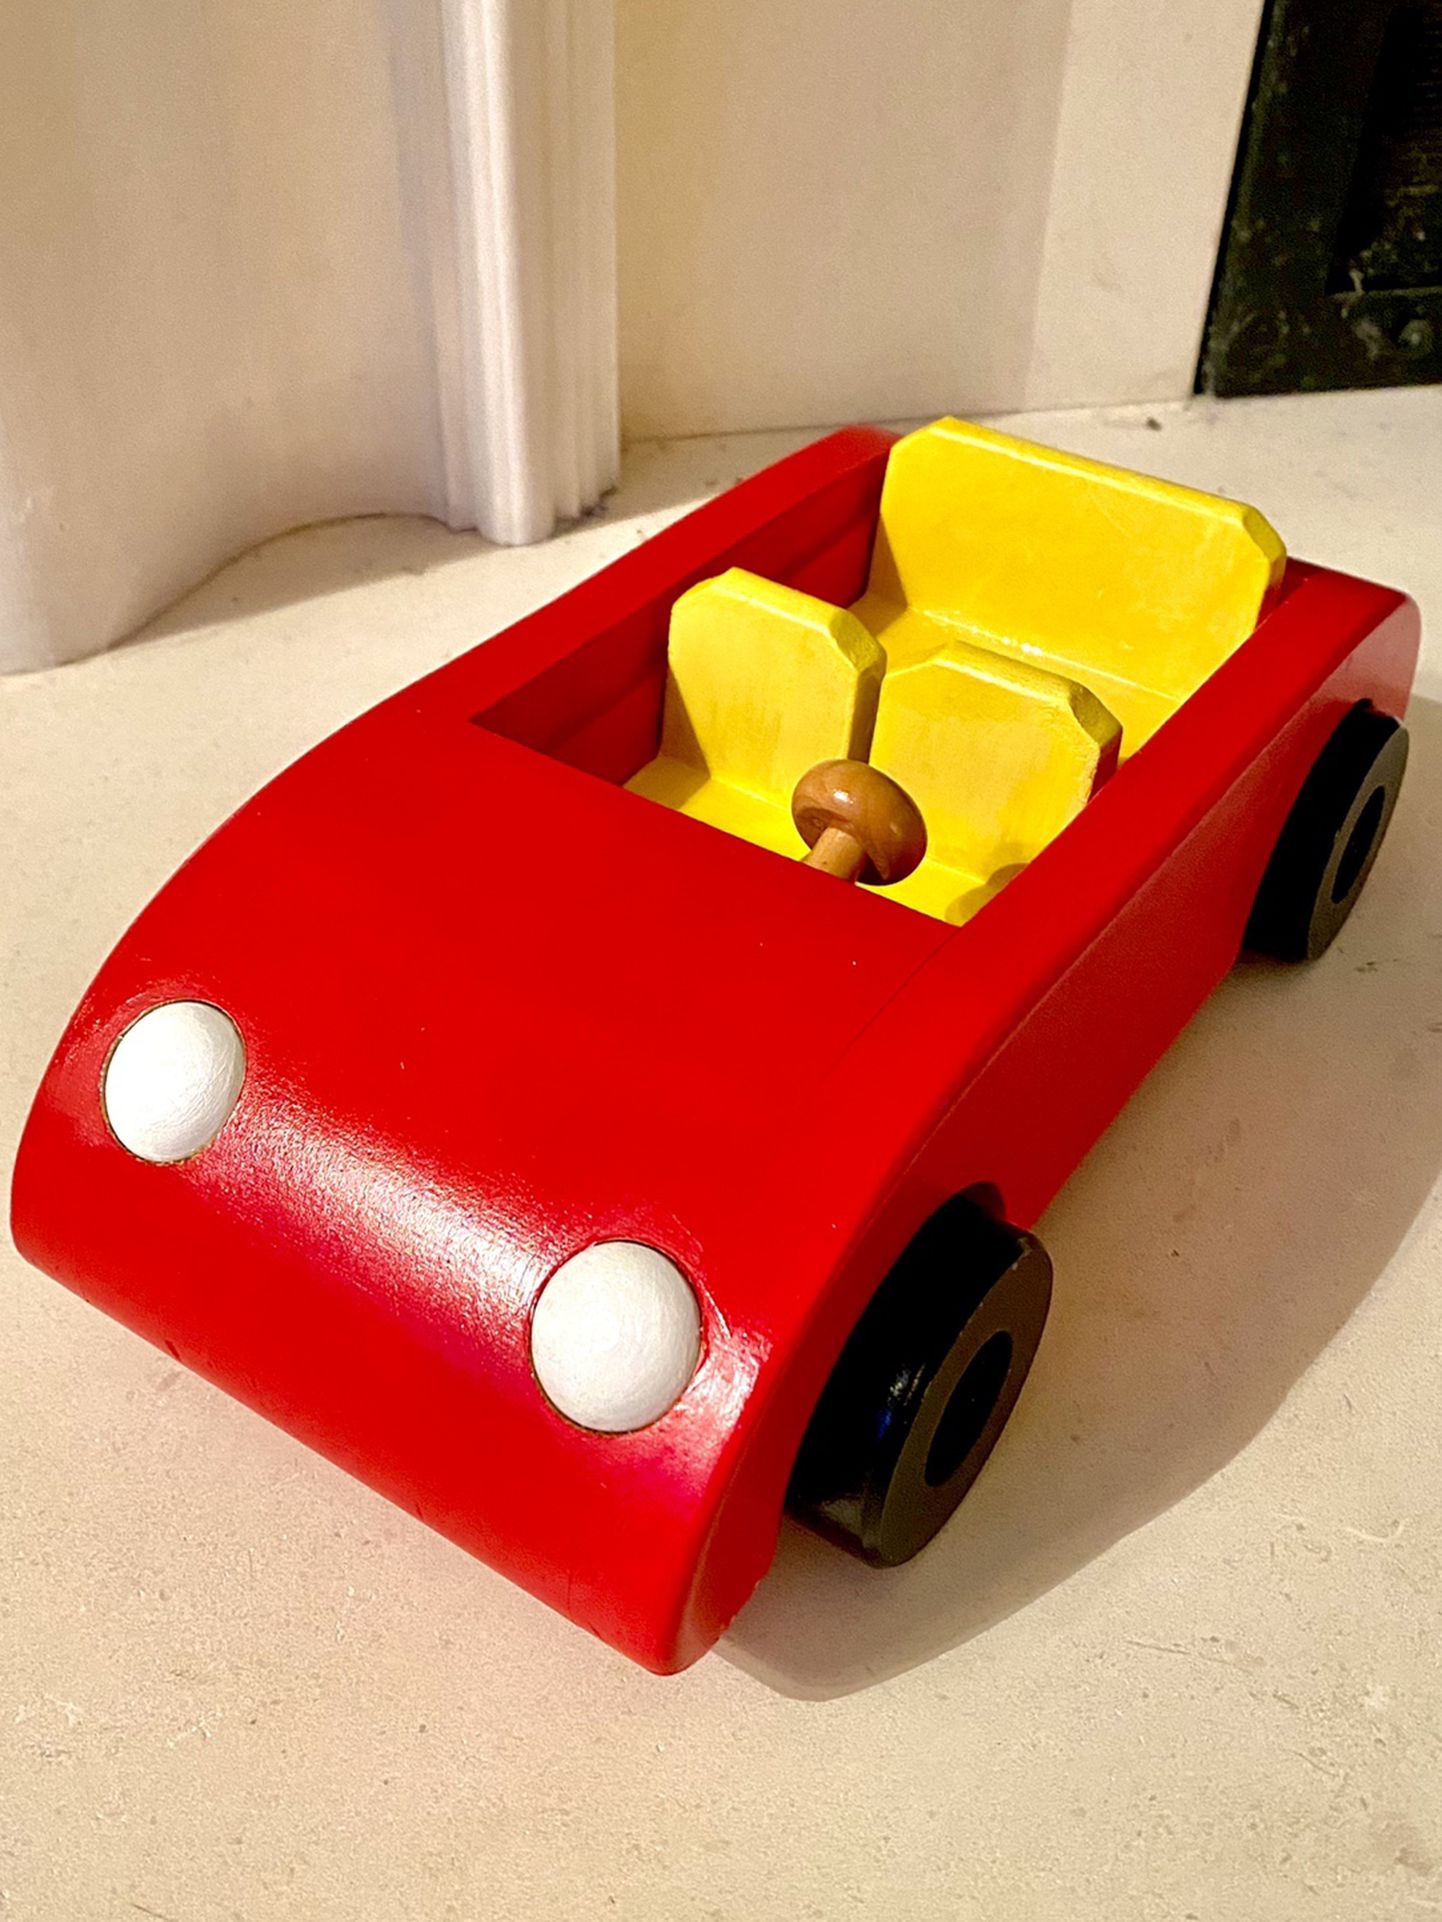 Ryan’s Room “Take A Ride” Red Convertible Wooden Car 🚗